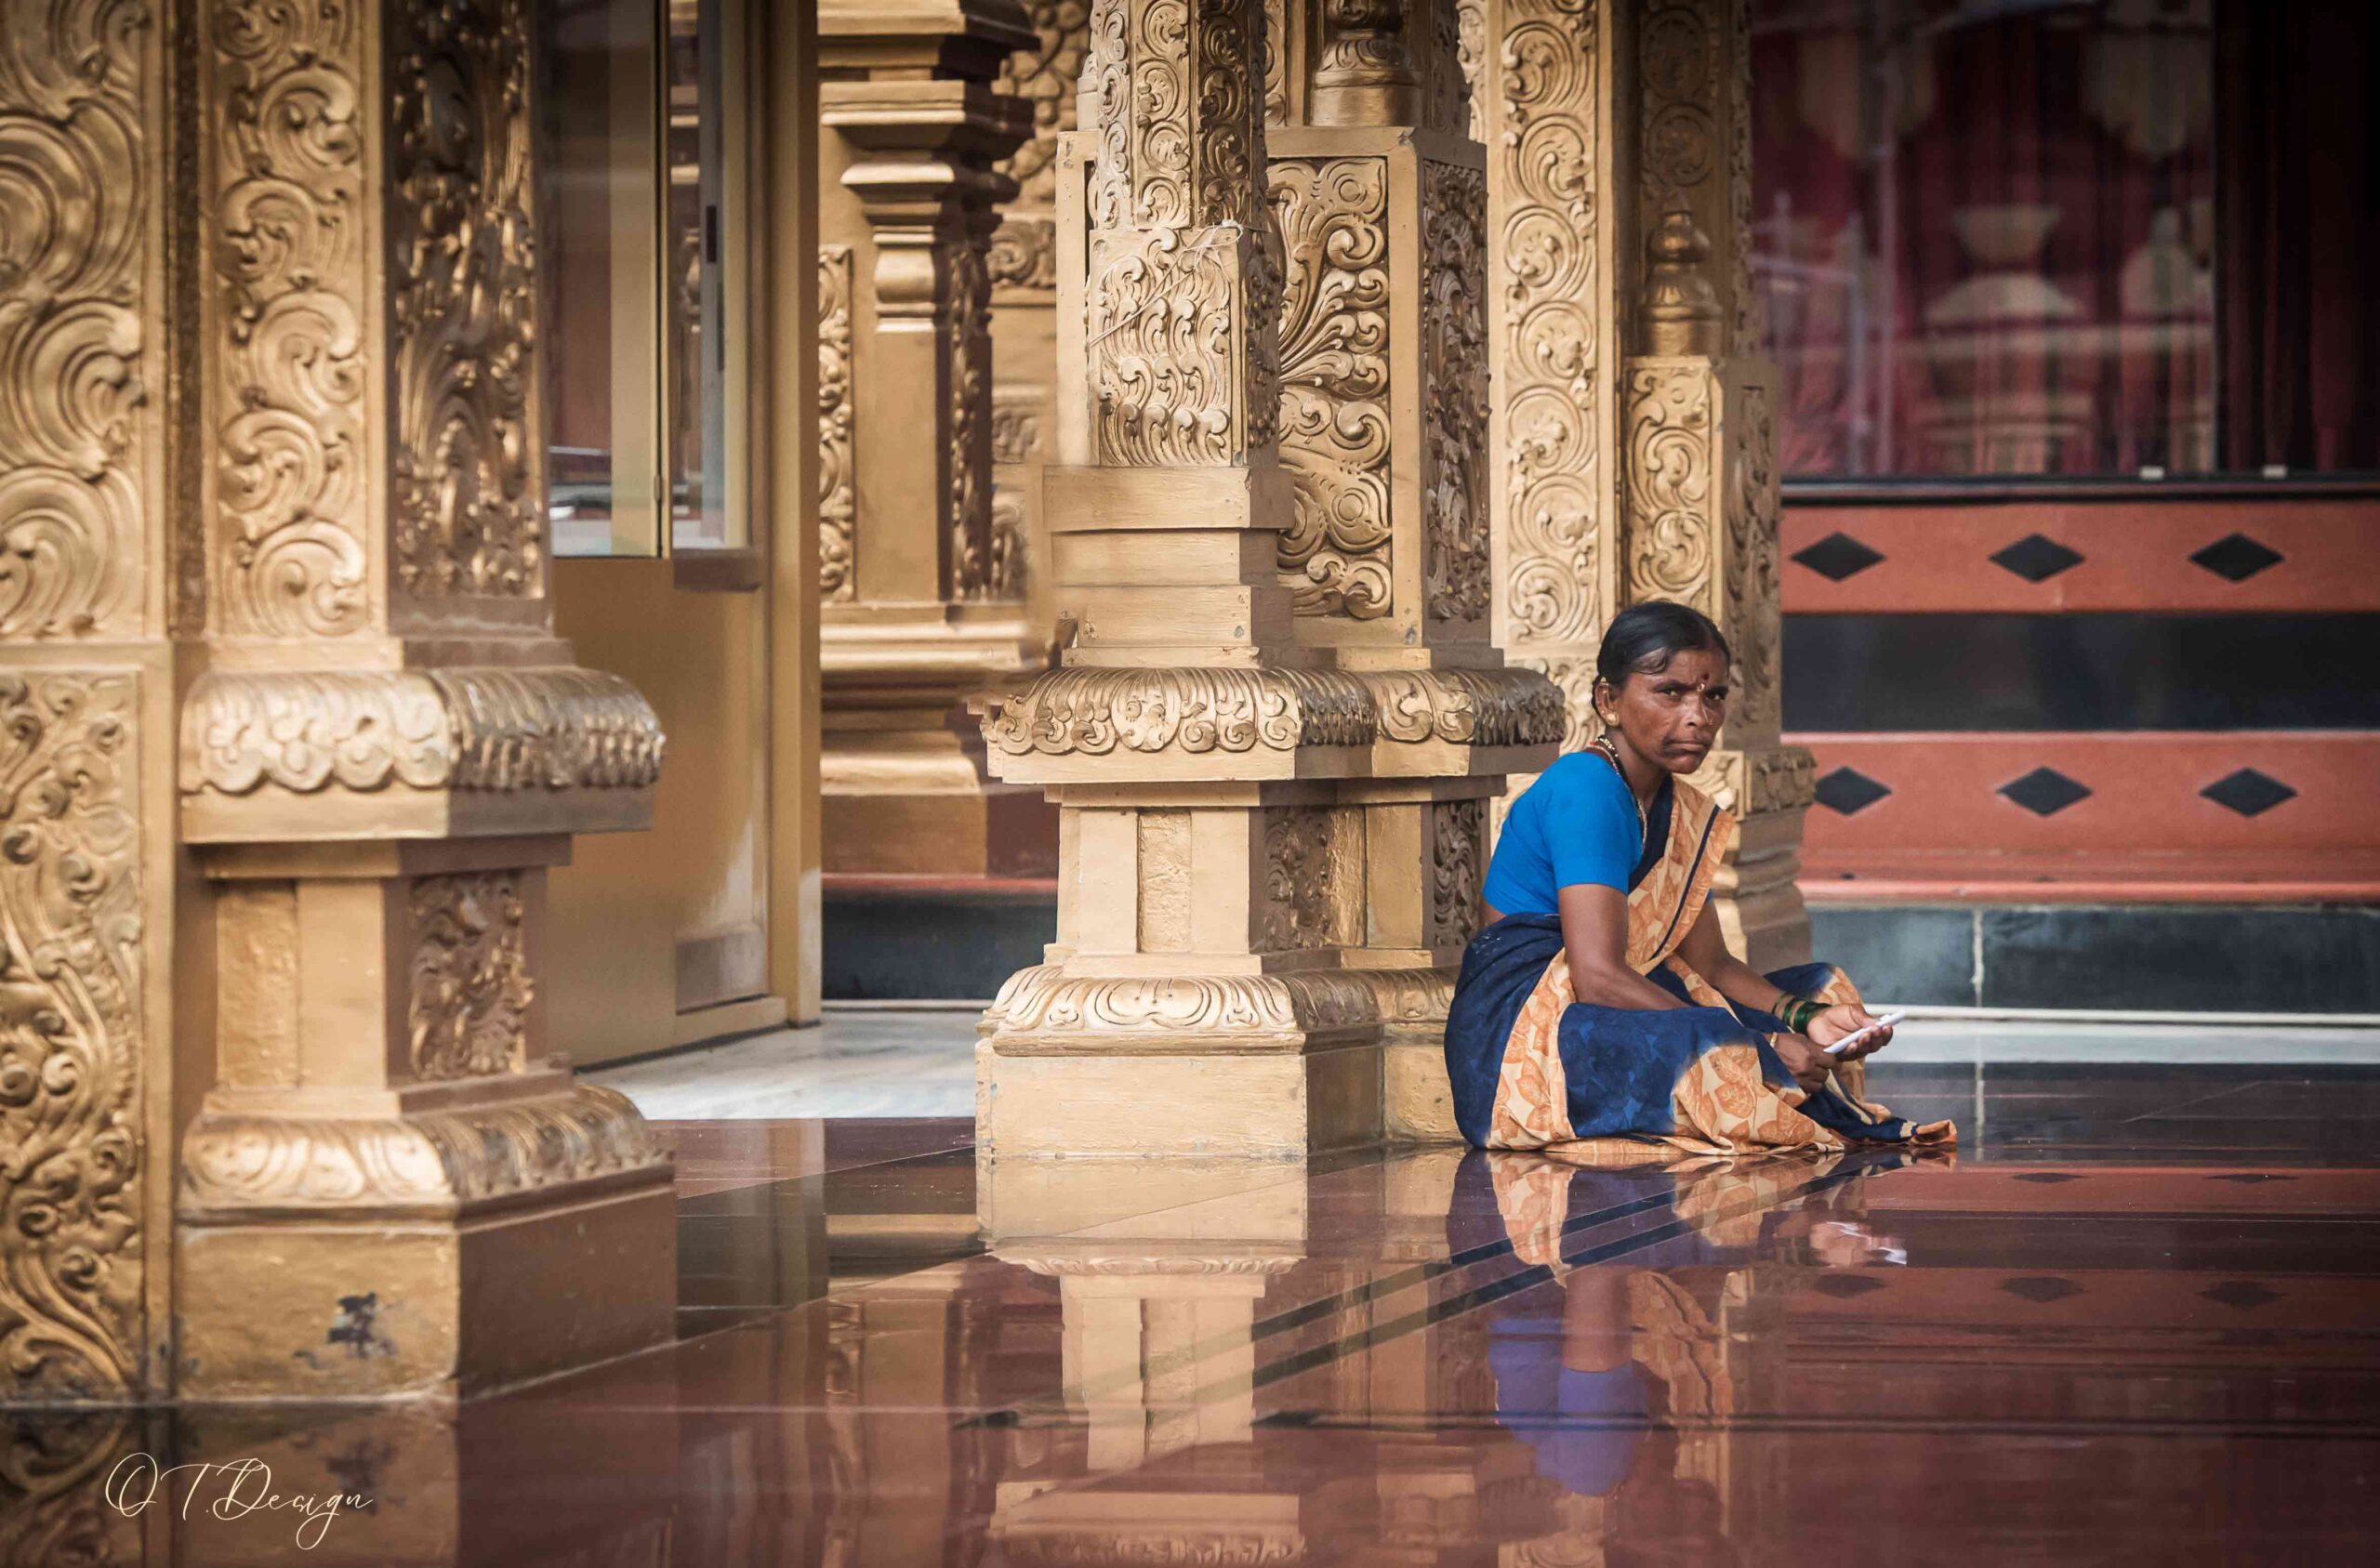 Lady praying on the floor of a temple in Mangalore, India